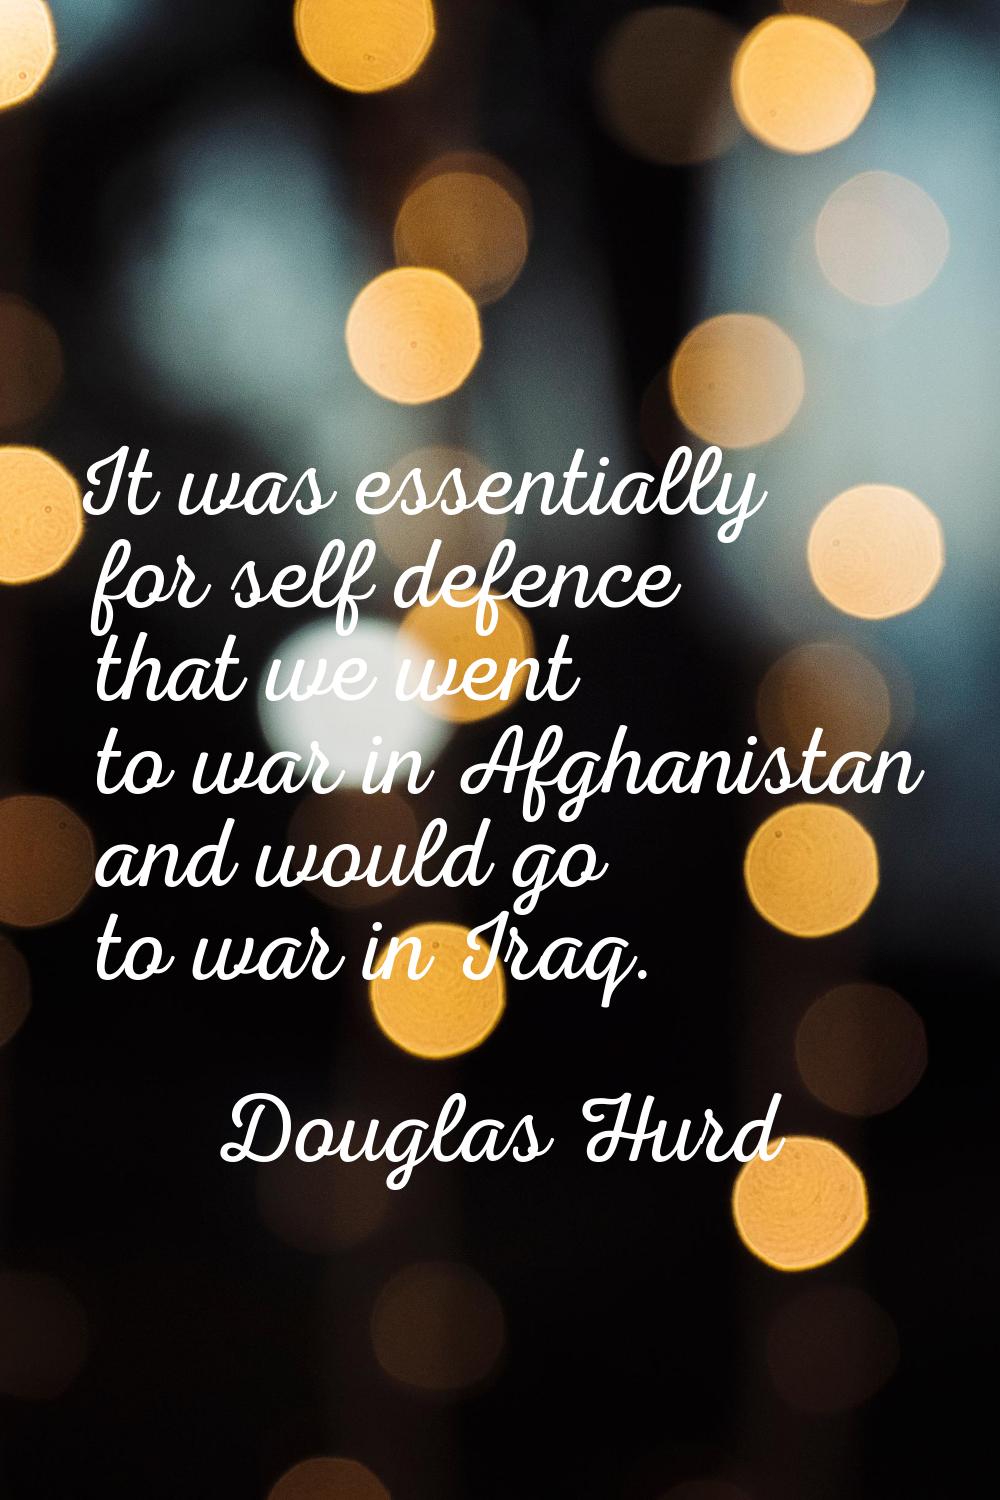 It was essentially for self defence that we went to war in Afghanistan and would go to war in Iraq.